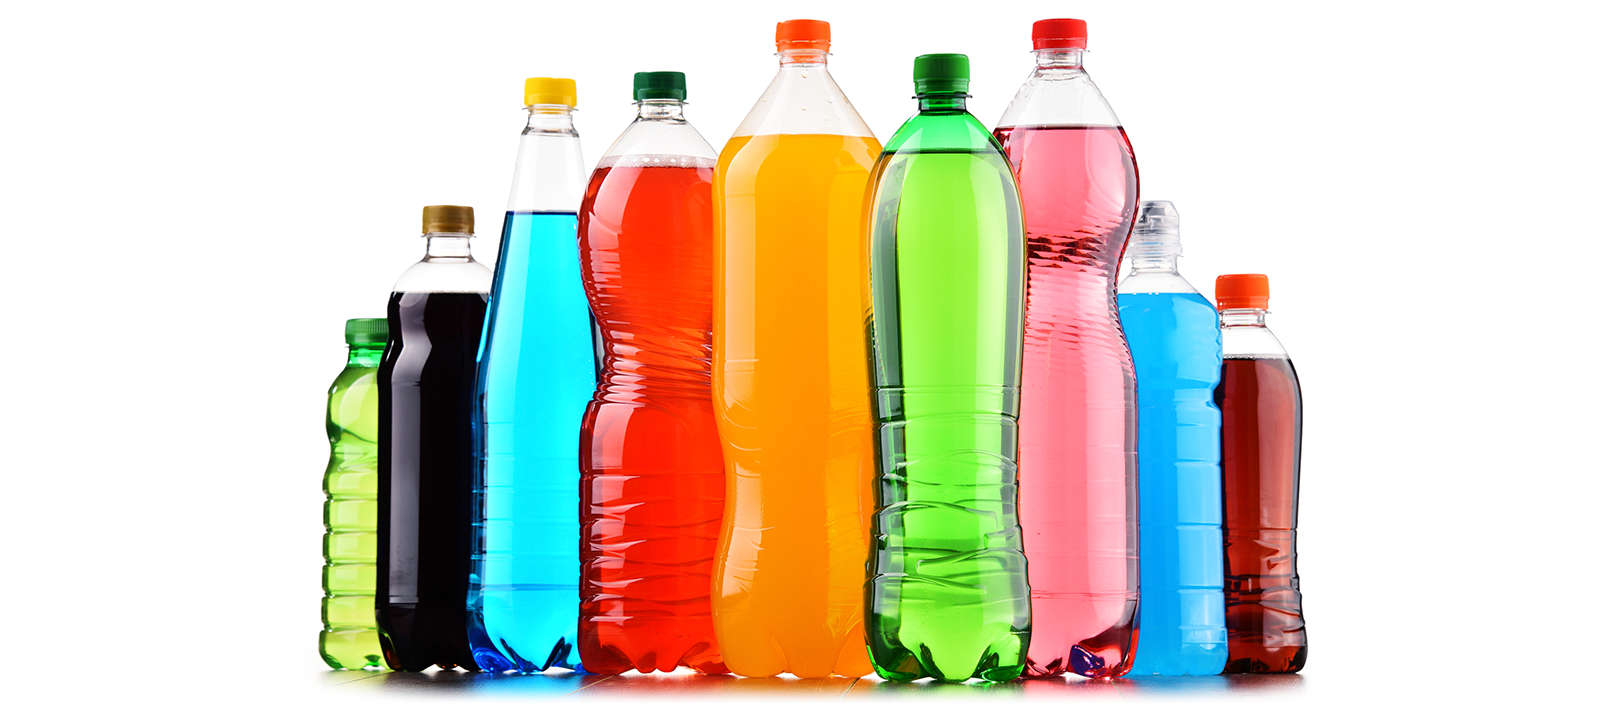 Generic bottles of different colored soft drinks with no labels on them, on a white background.